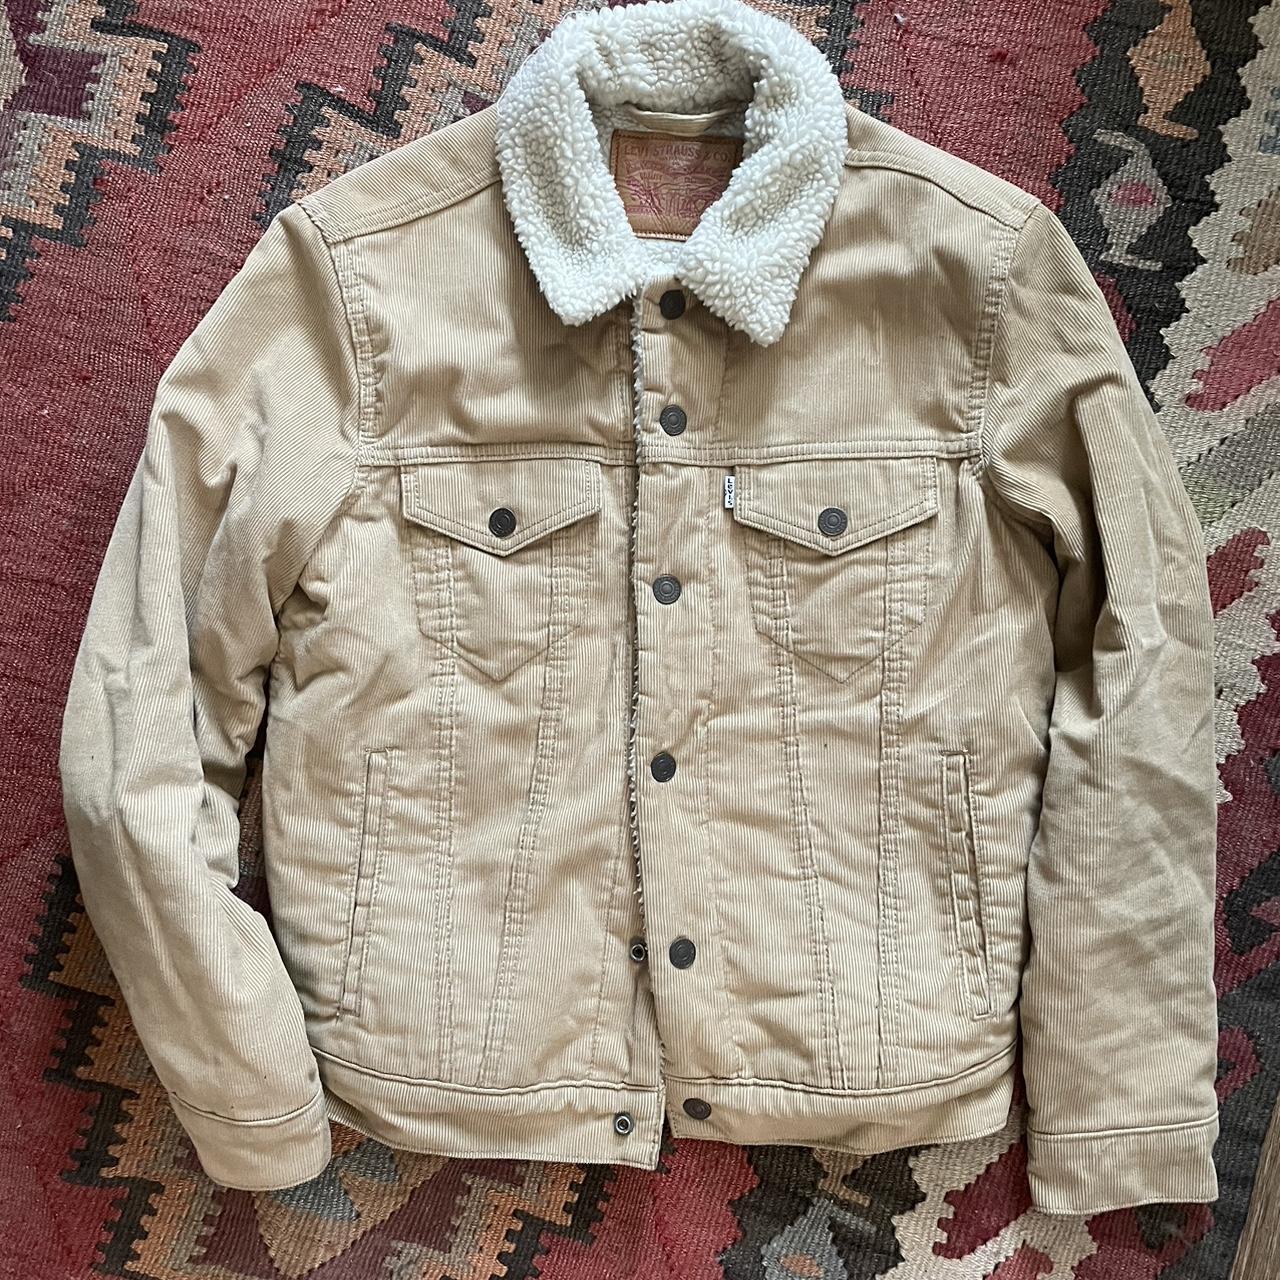 Levis Sherpa tan corduroy jacket! Great for fall and... - Depop